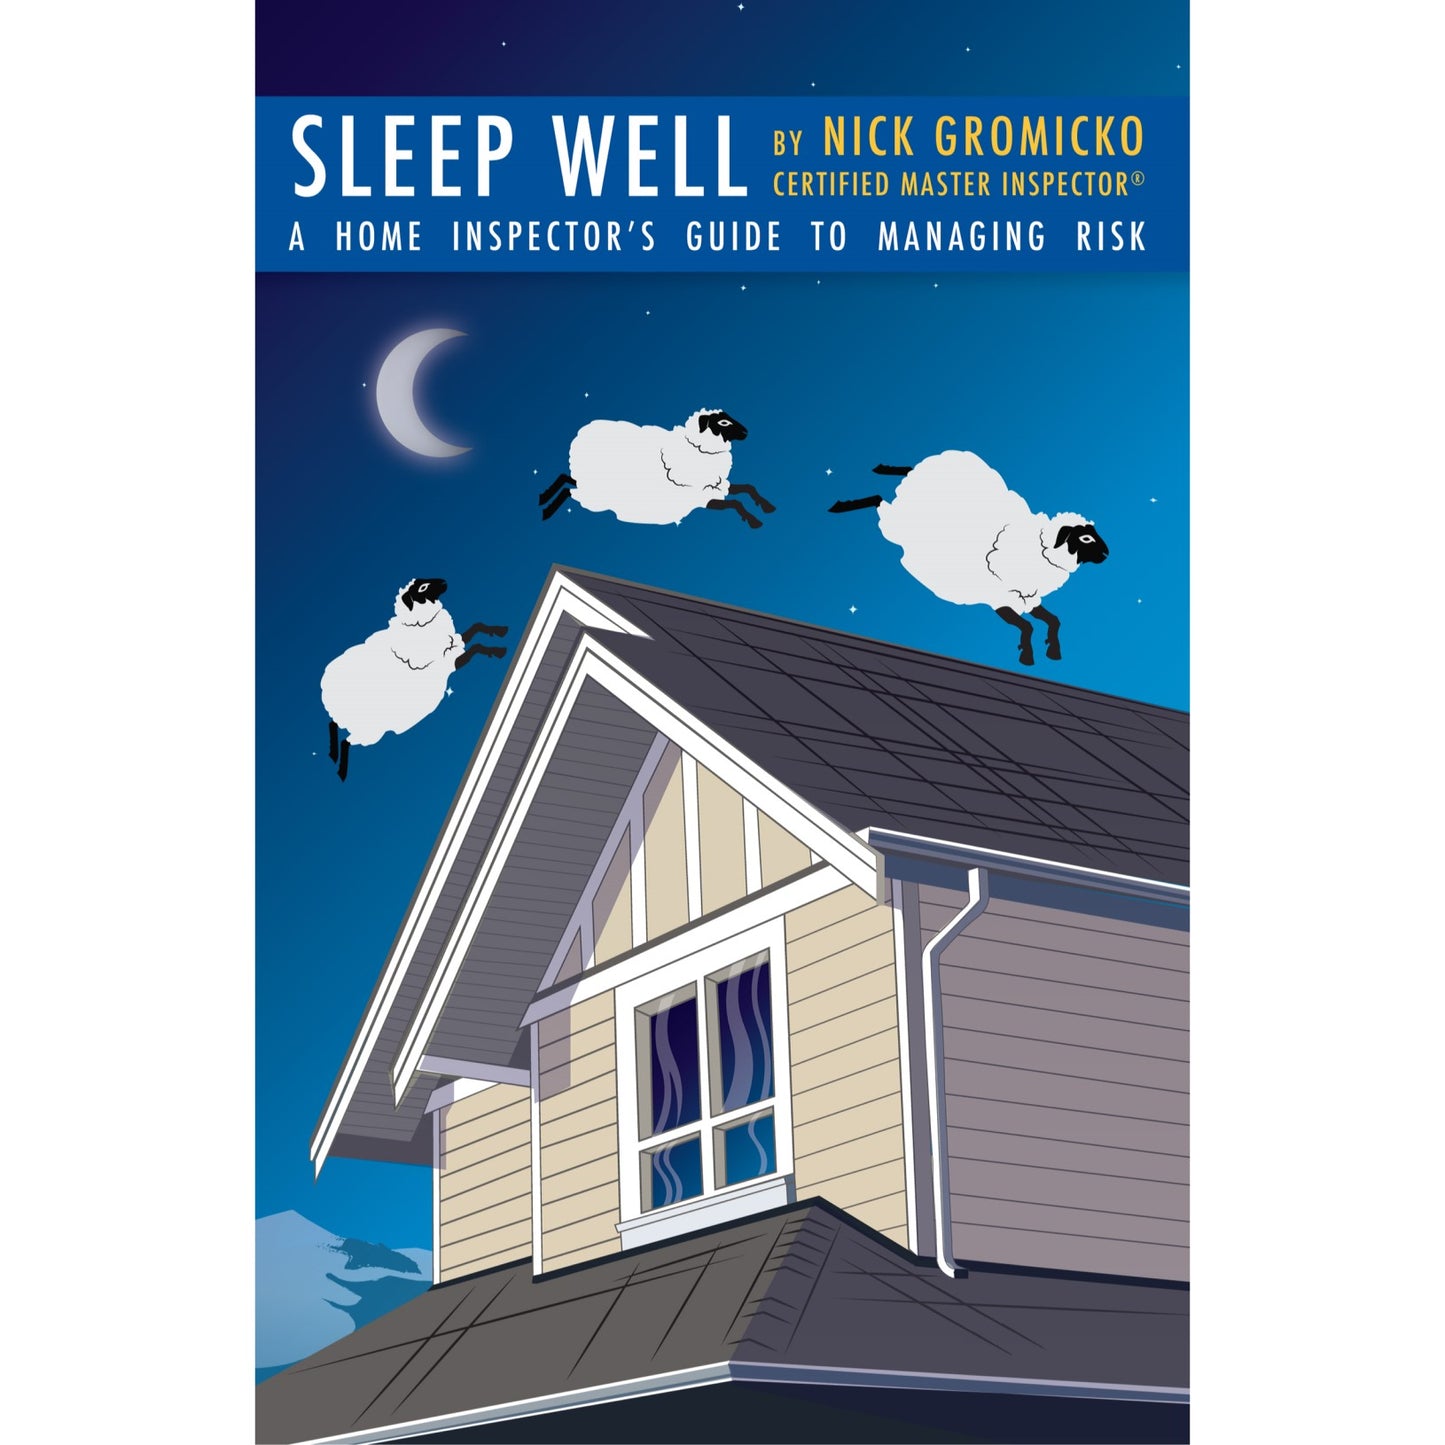 Sleep Well: A Home Inspector's Guide to Managing Risk